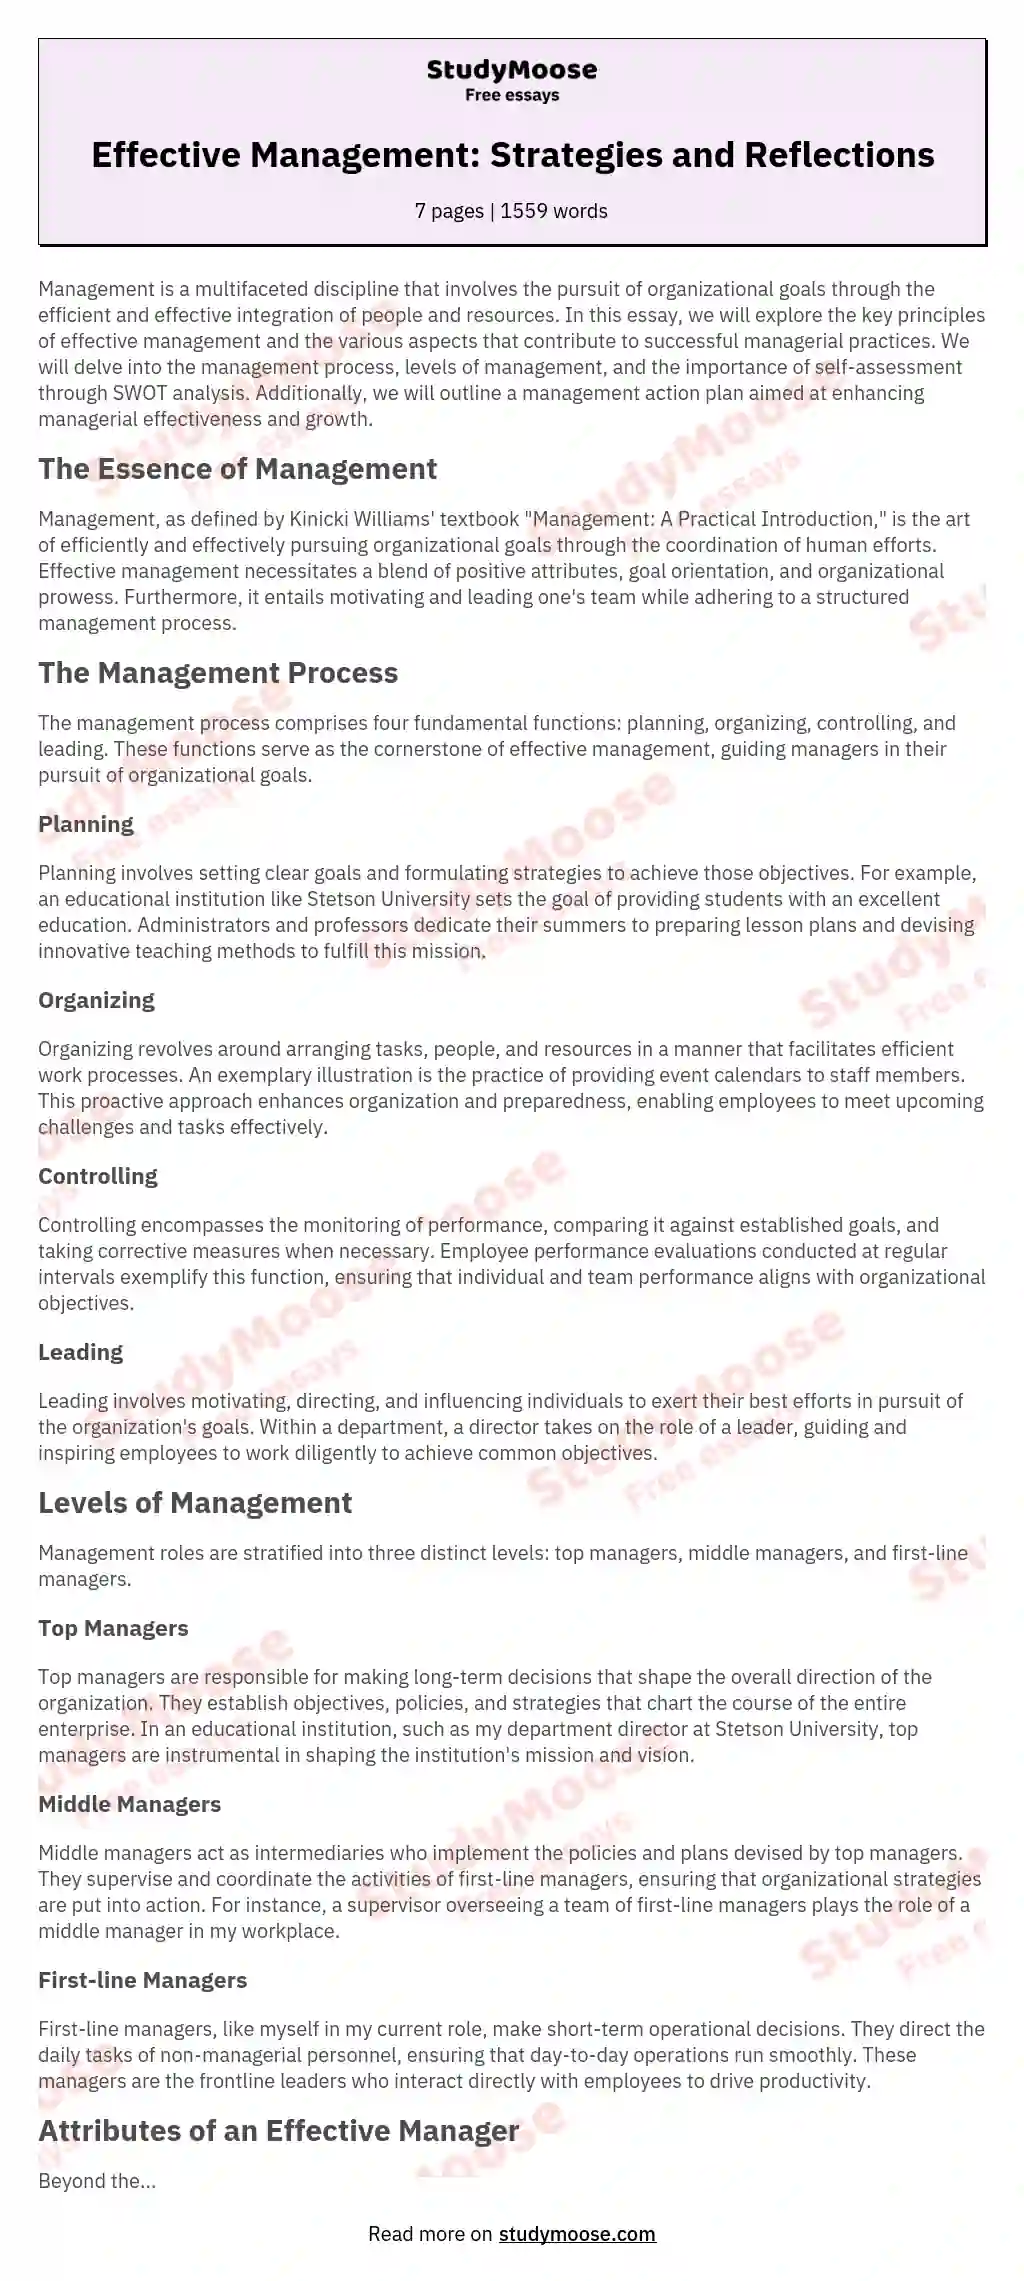 Effective Management: Strategies and Reflections essay